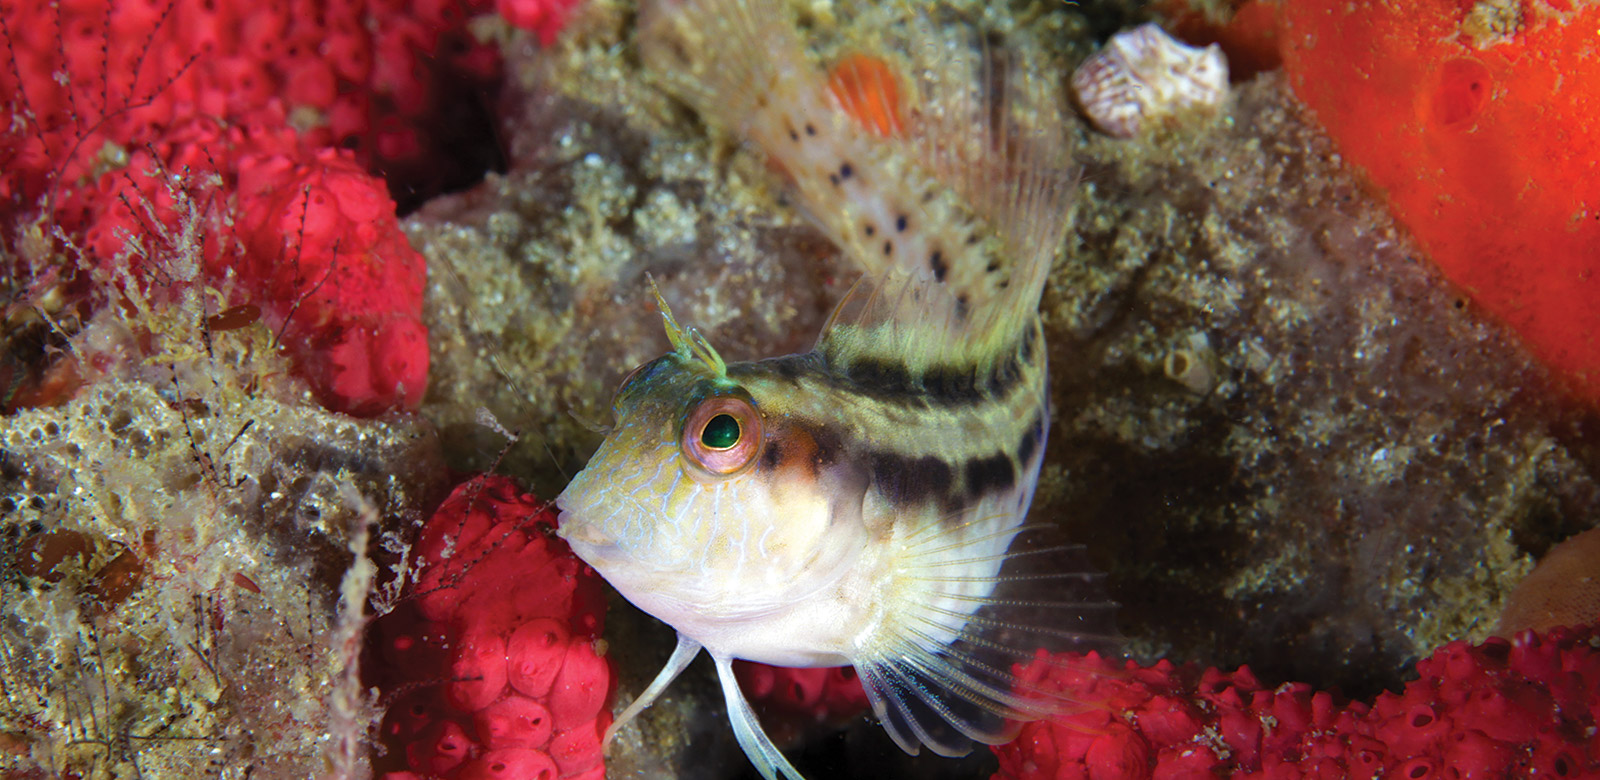 Seaweed blenny swimming in a reef